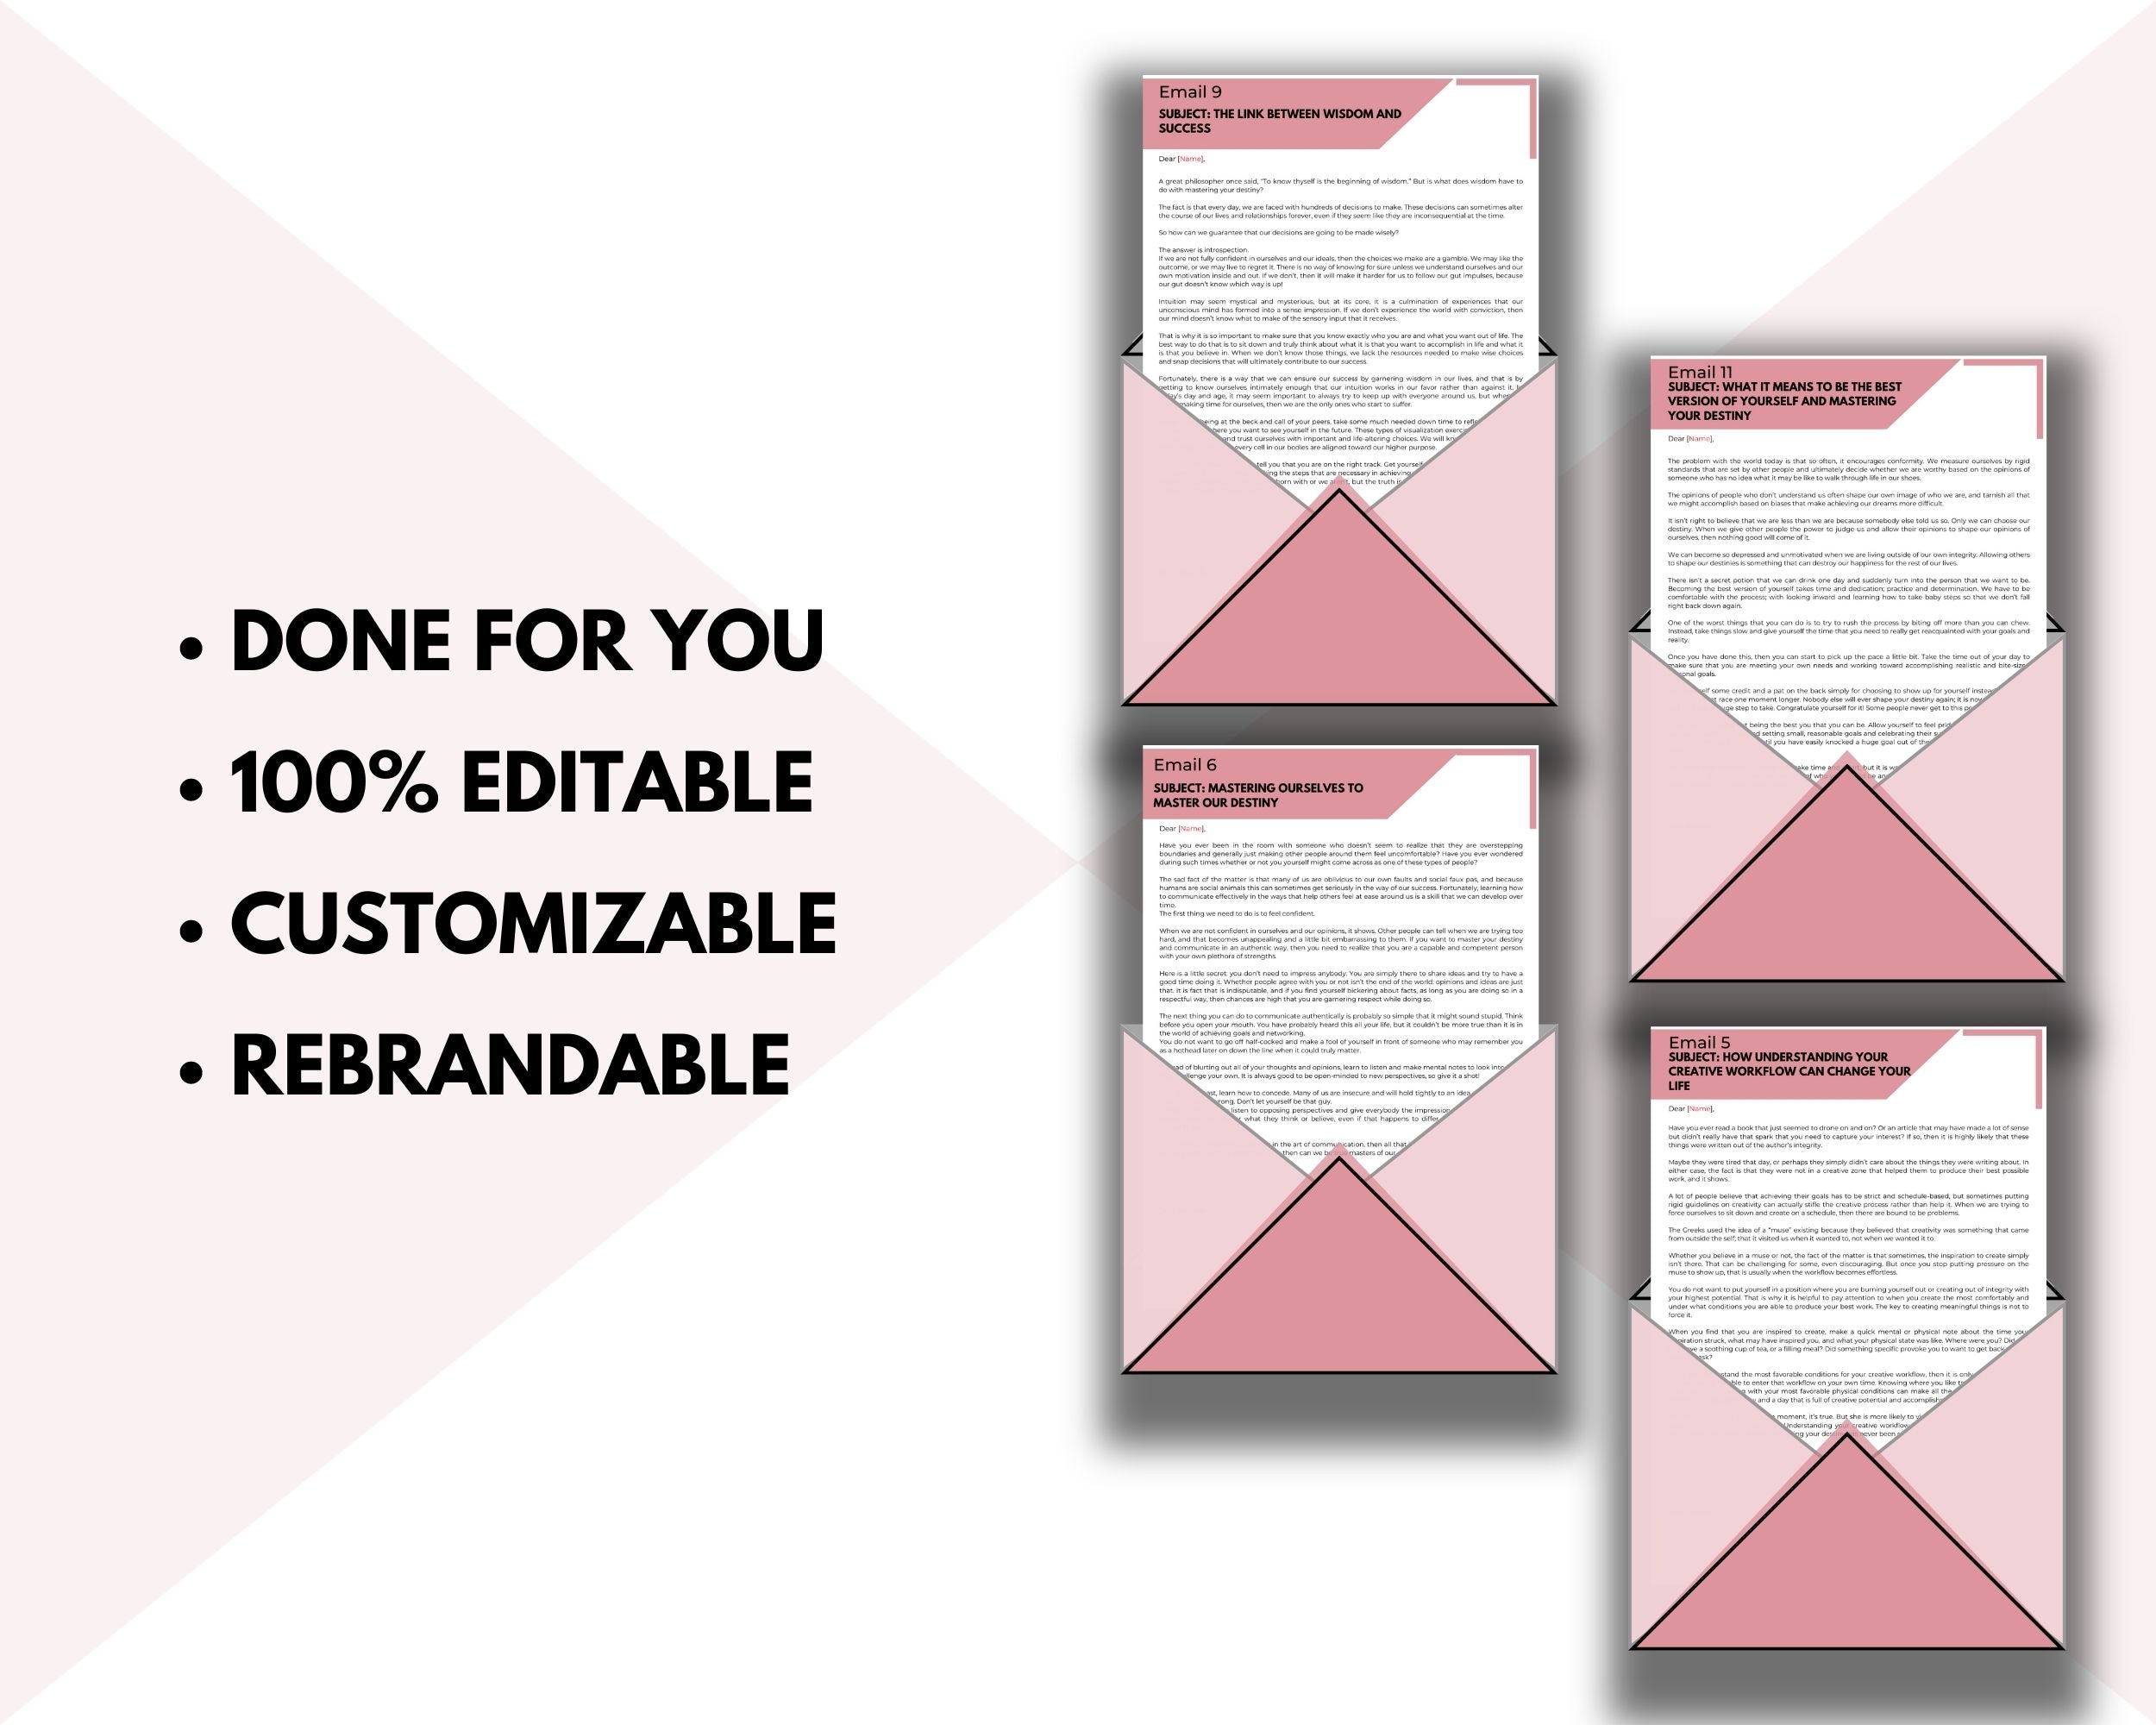 Editable 10 Day Know Yourself Emails | Rebrandable Done-for-You eCourse